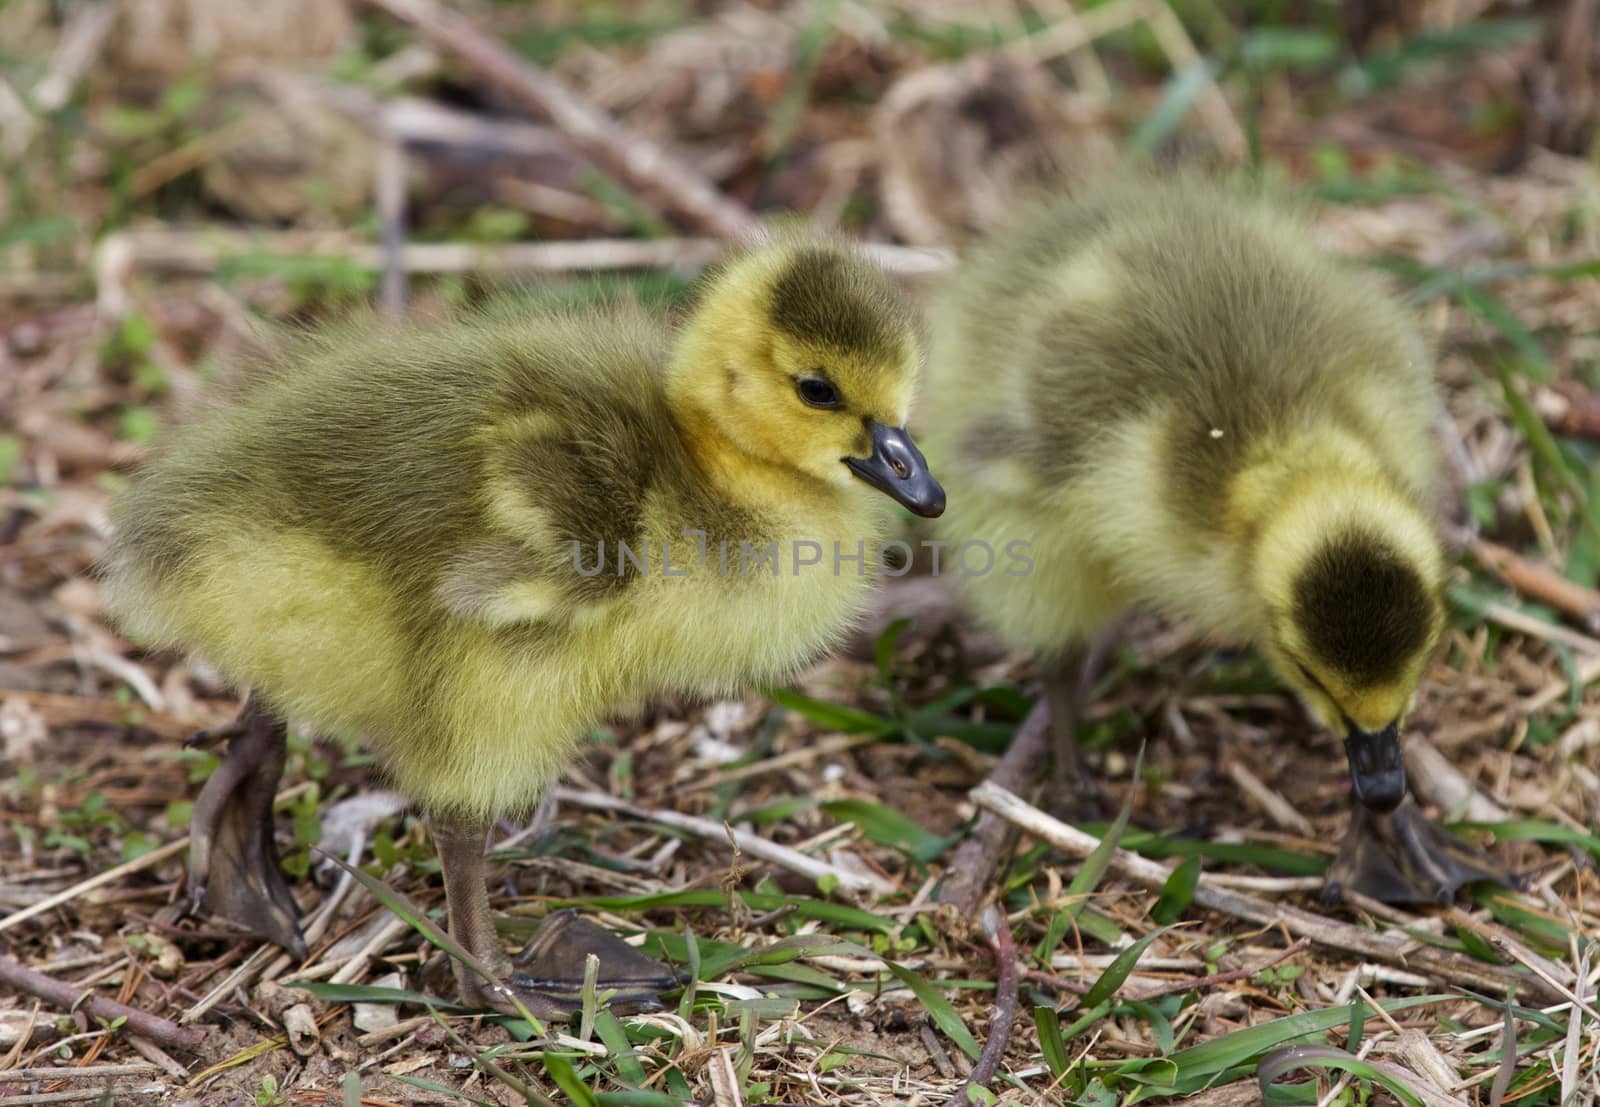 Beautiful photo with two chicks of the Canada geese going somewhere